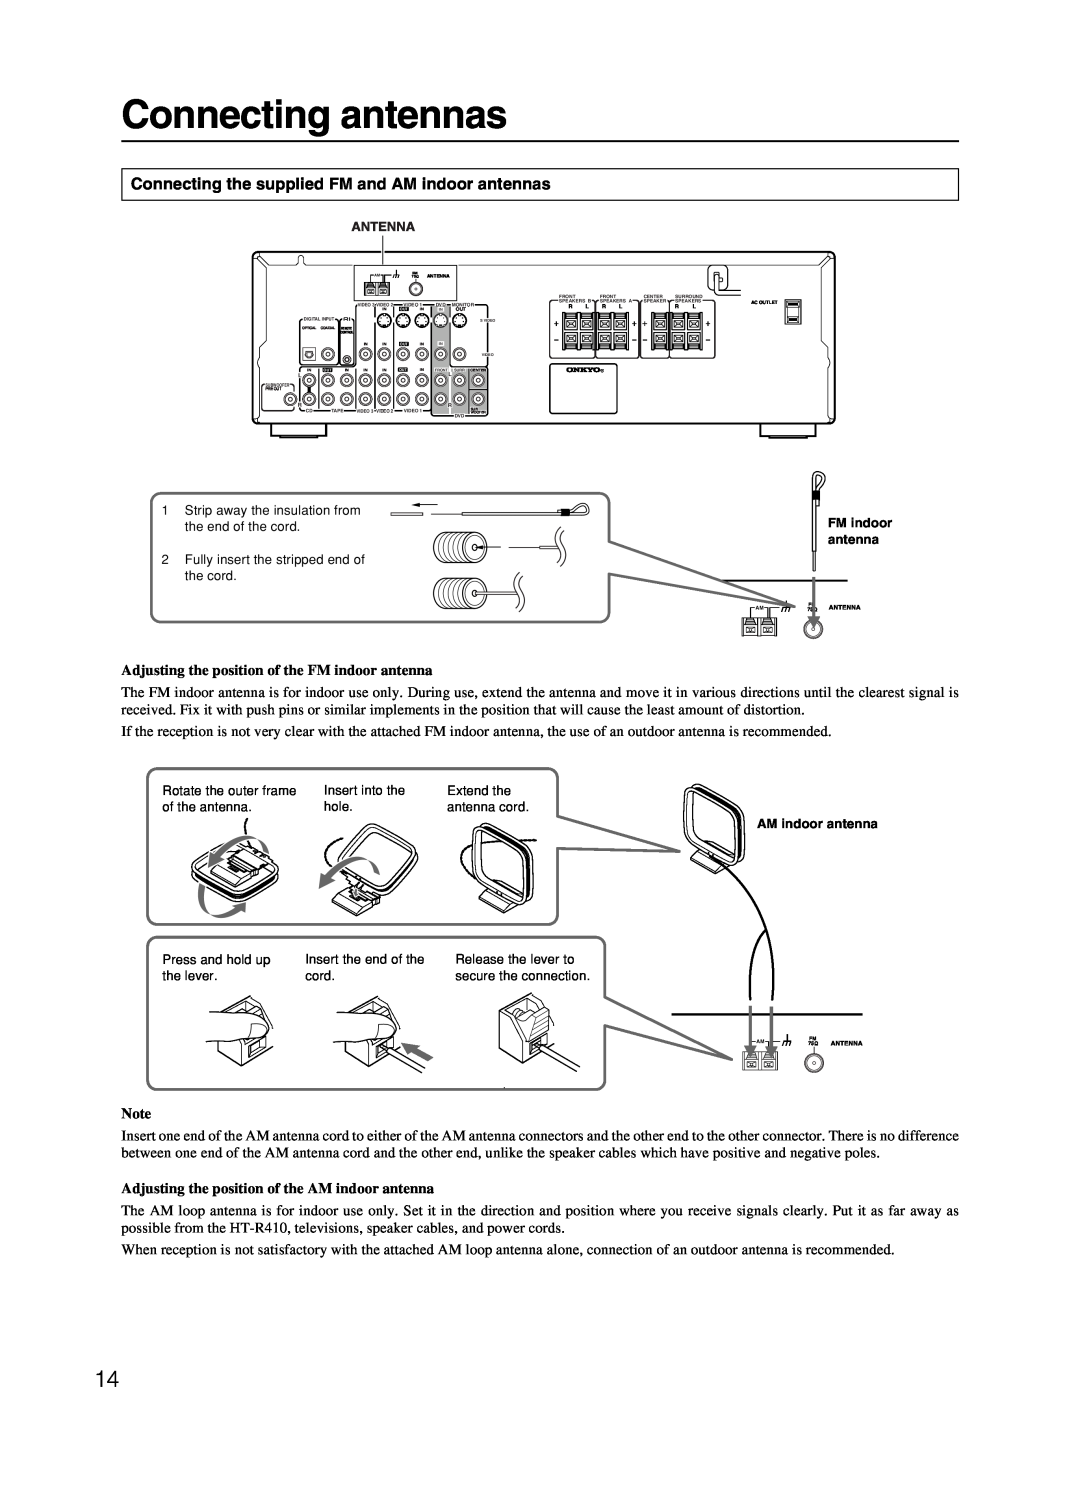 Onkyo HT-R410 appendix Connecting antennas, Connecting the supplied FM and AM indoor antennas 